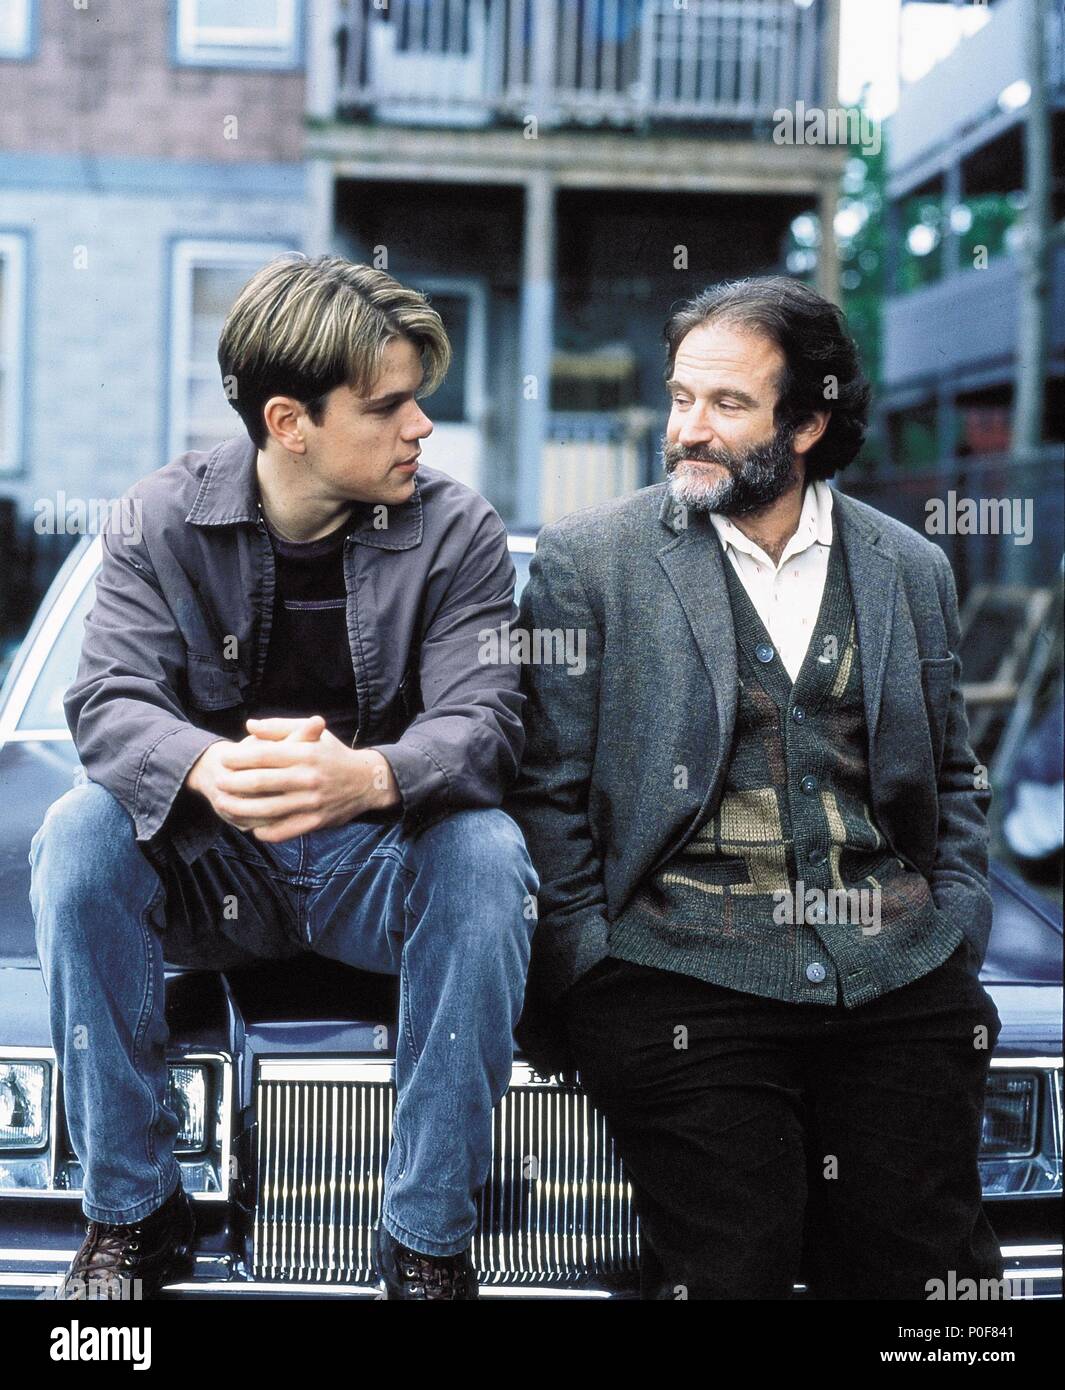 Original Film Title: GOOD WILL HUNTING. English Title: GOOD WILL HUNTING.  Film Director: GUS VAN SANT. Year: 1997. Stars: ROBIN WILLIAMS; MATT DAMON.  Copyright: Editorial inside use only. This is a publicly